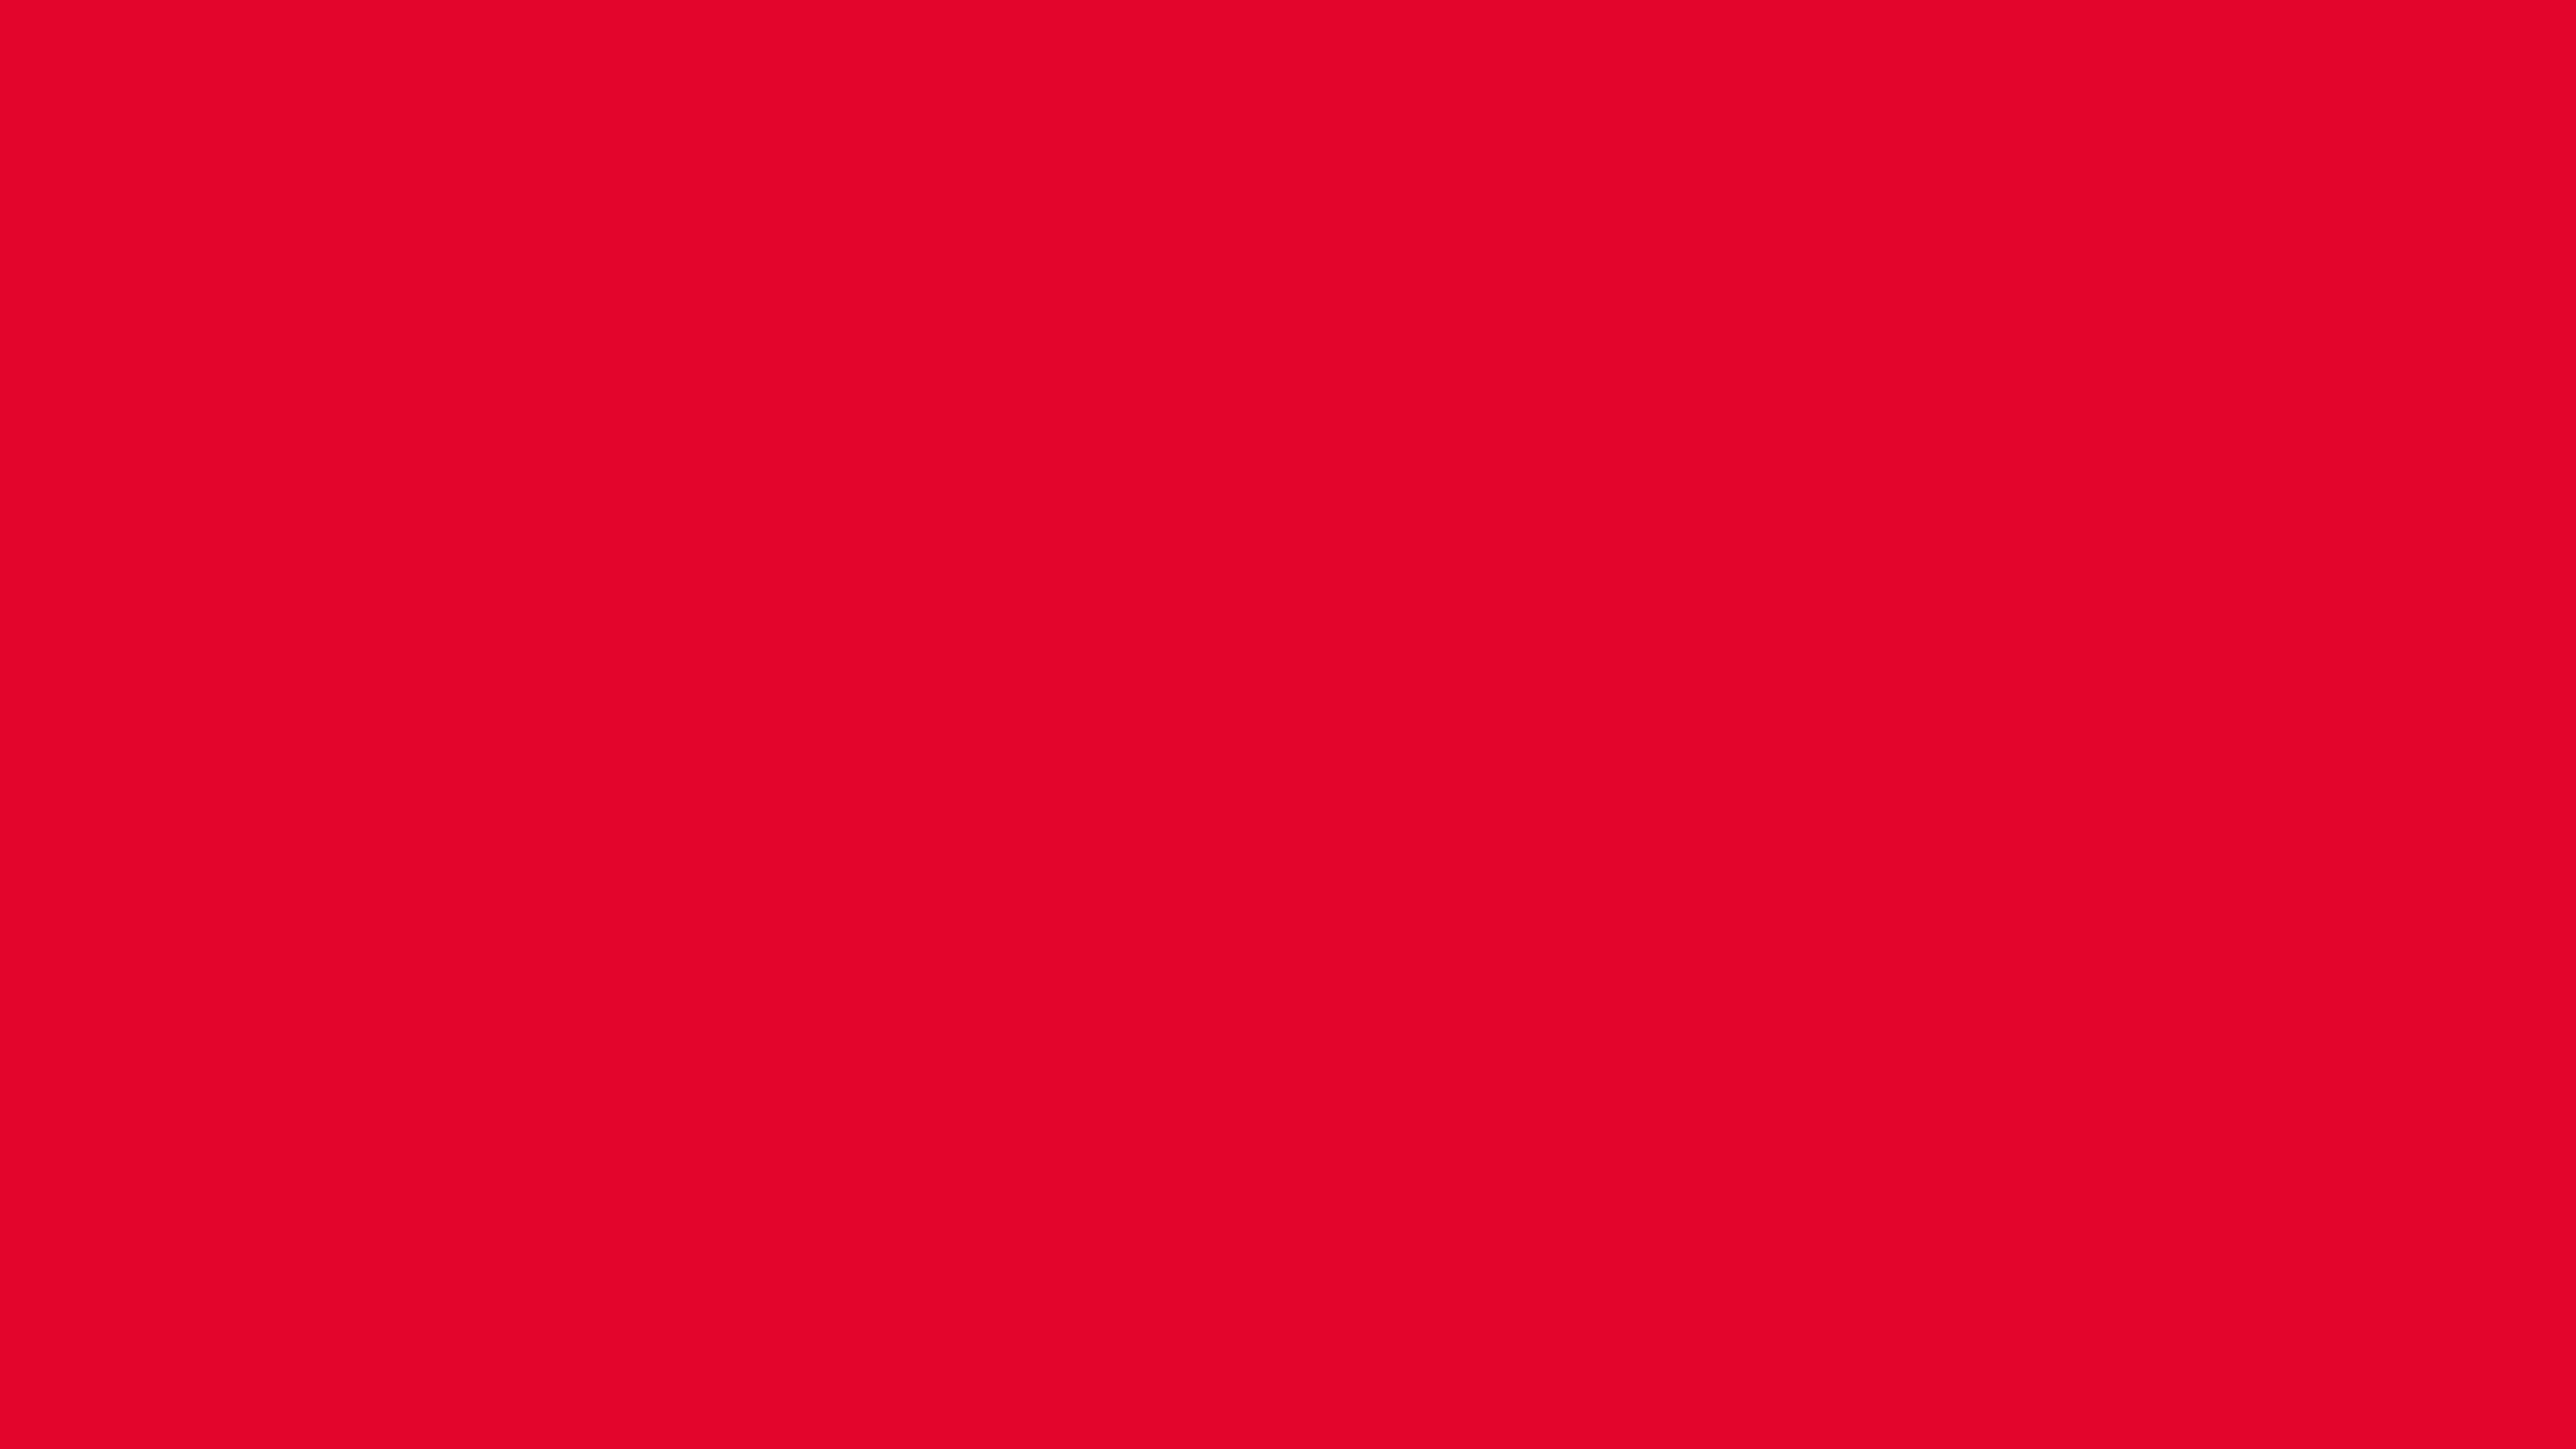 3840x2160 Medium Candy Apple Red Solid Color Background